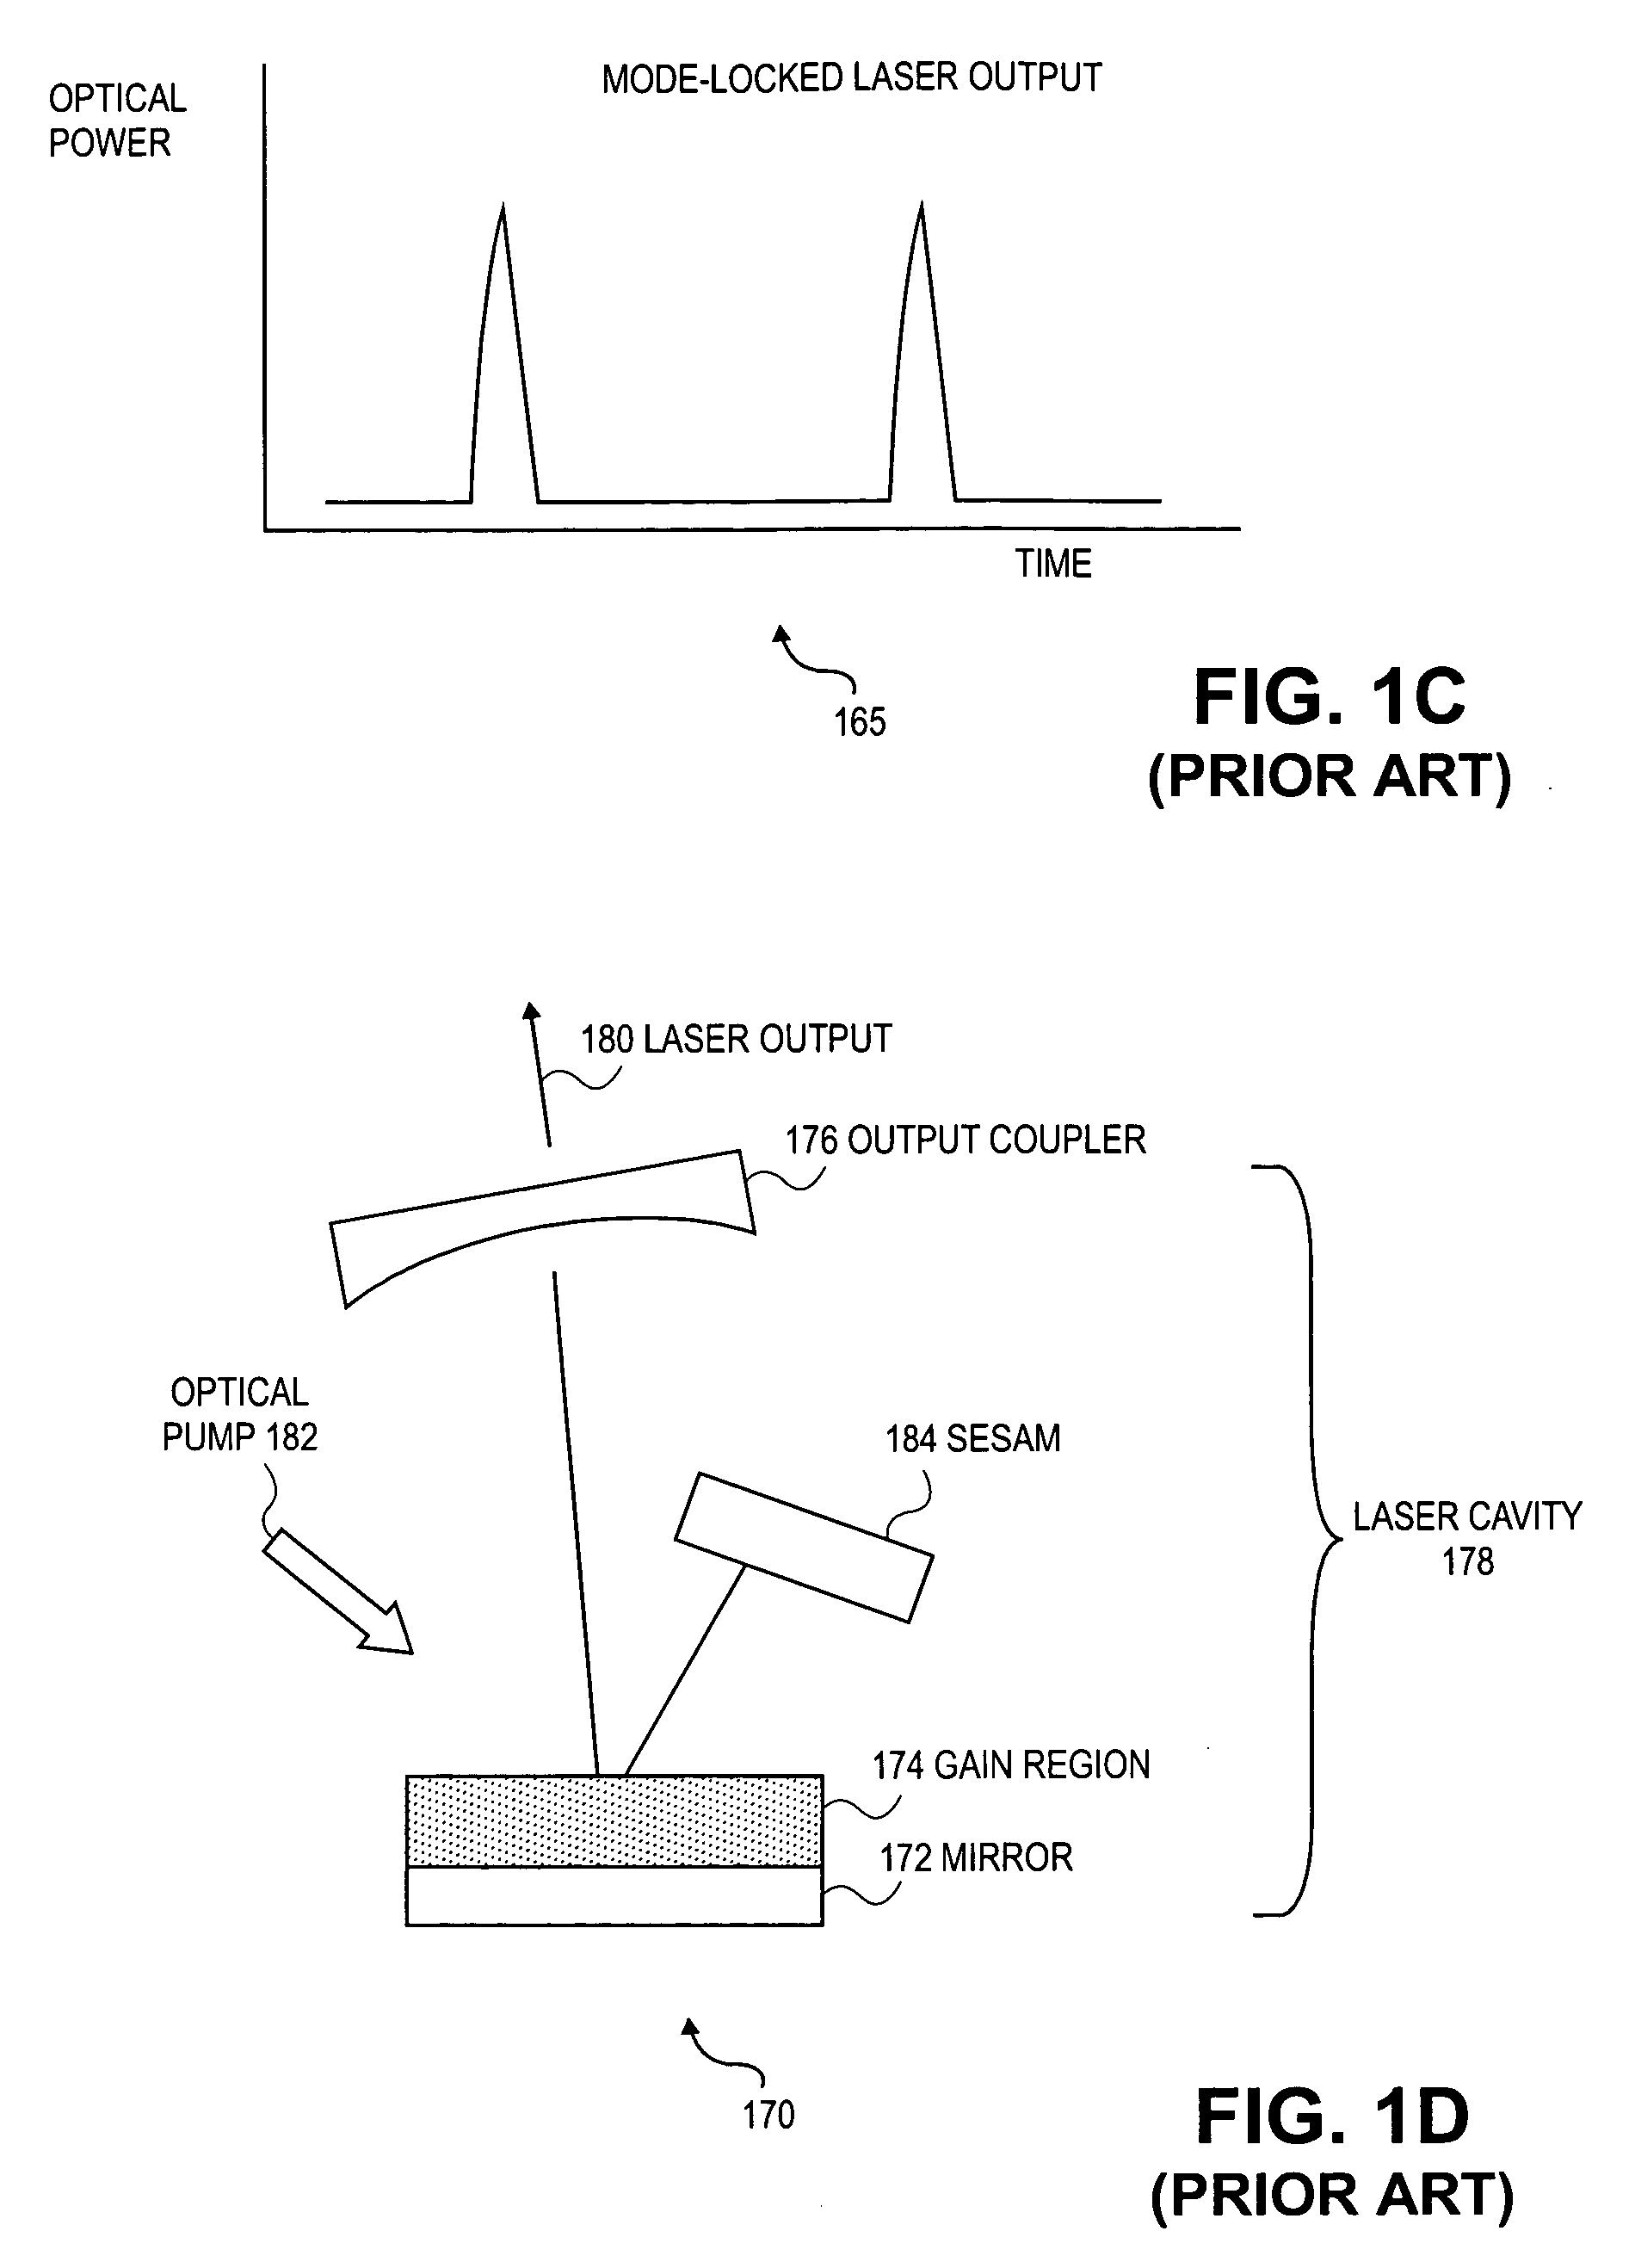 Surface emitting laser with an integrated absorber